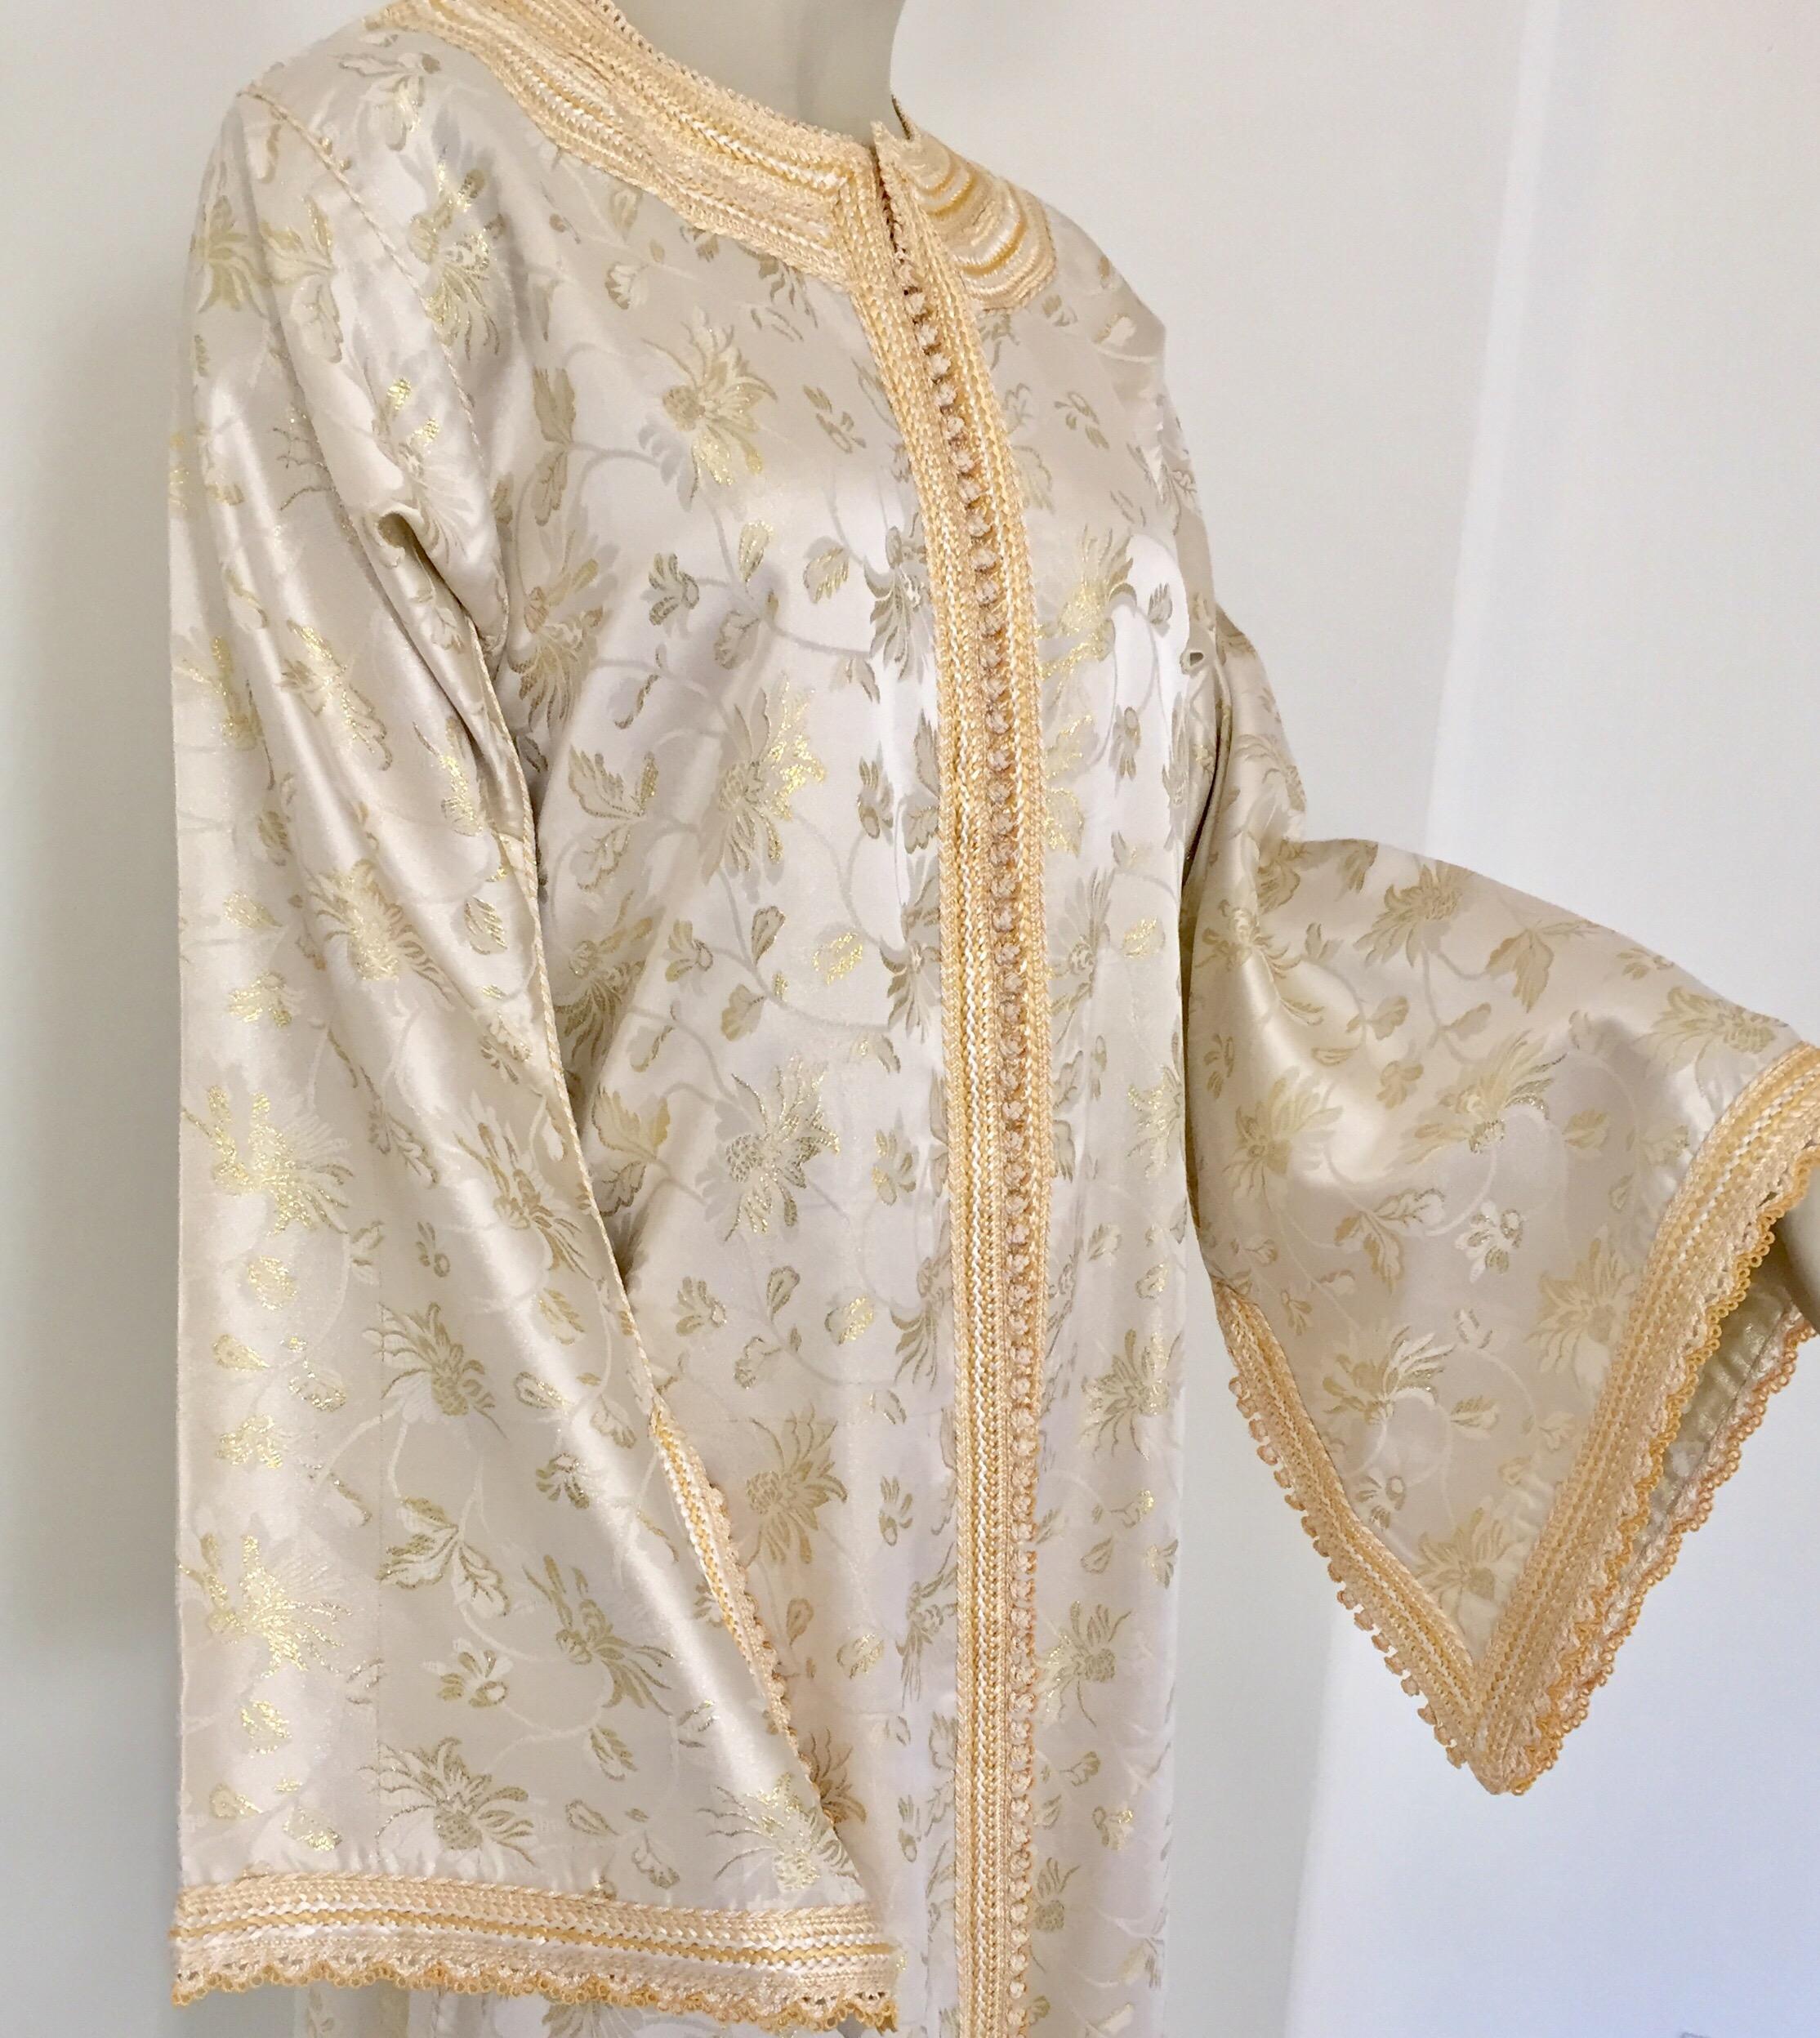 Vintage Moroccan Kaftan White and Gold Metallic Floral Brocade Caftan 1970's For Sale 1